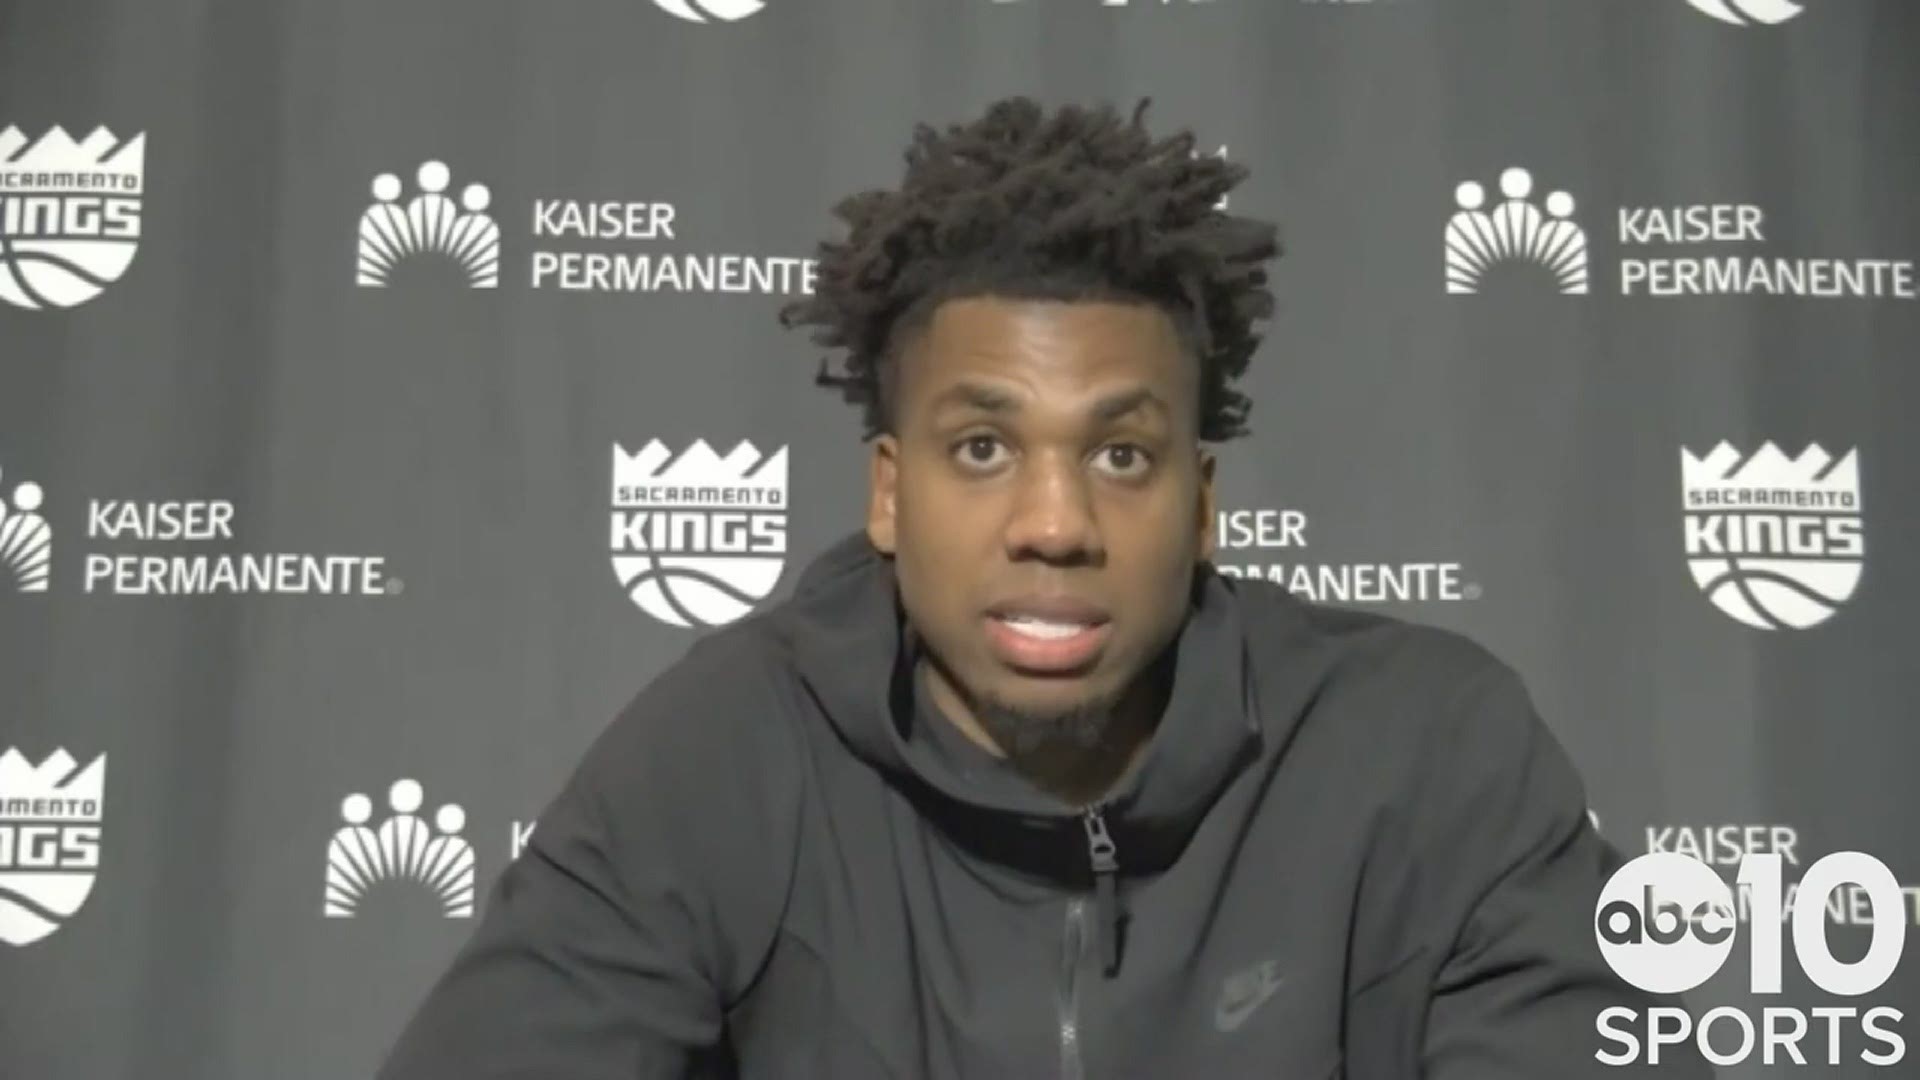 Hassan Whiteside, who finished with 26 points, 16 rebounds and five blocks, talks about Sacramento’s defensive struggles following Monday’s 136-125 loss to the Nets